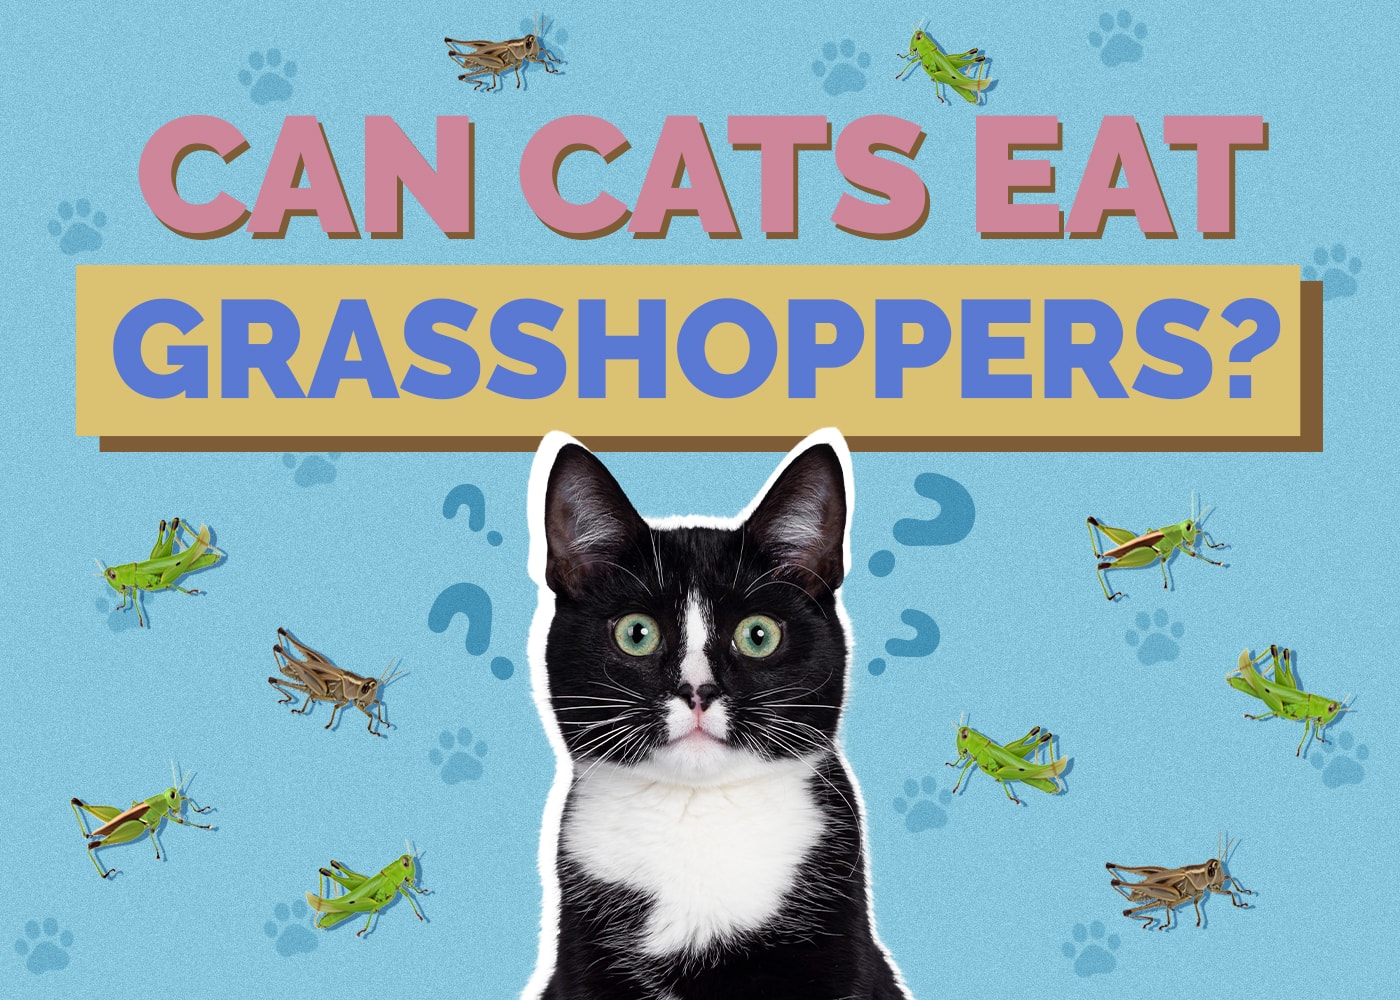 Can Cats Eat grasshoppers